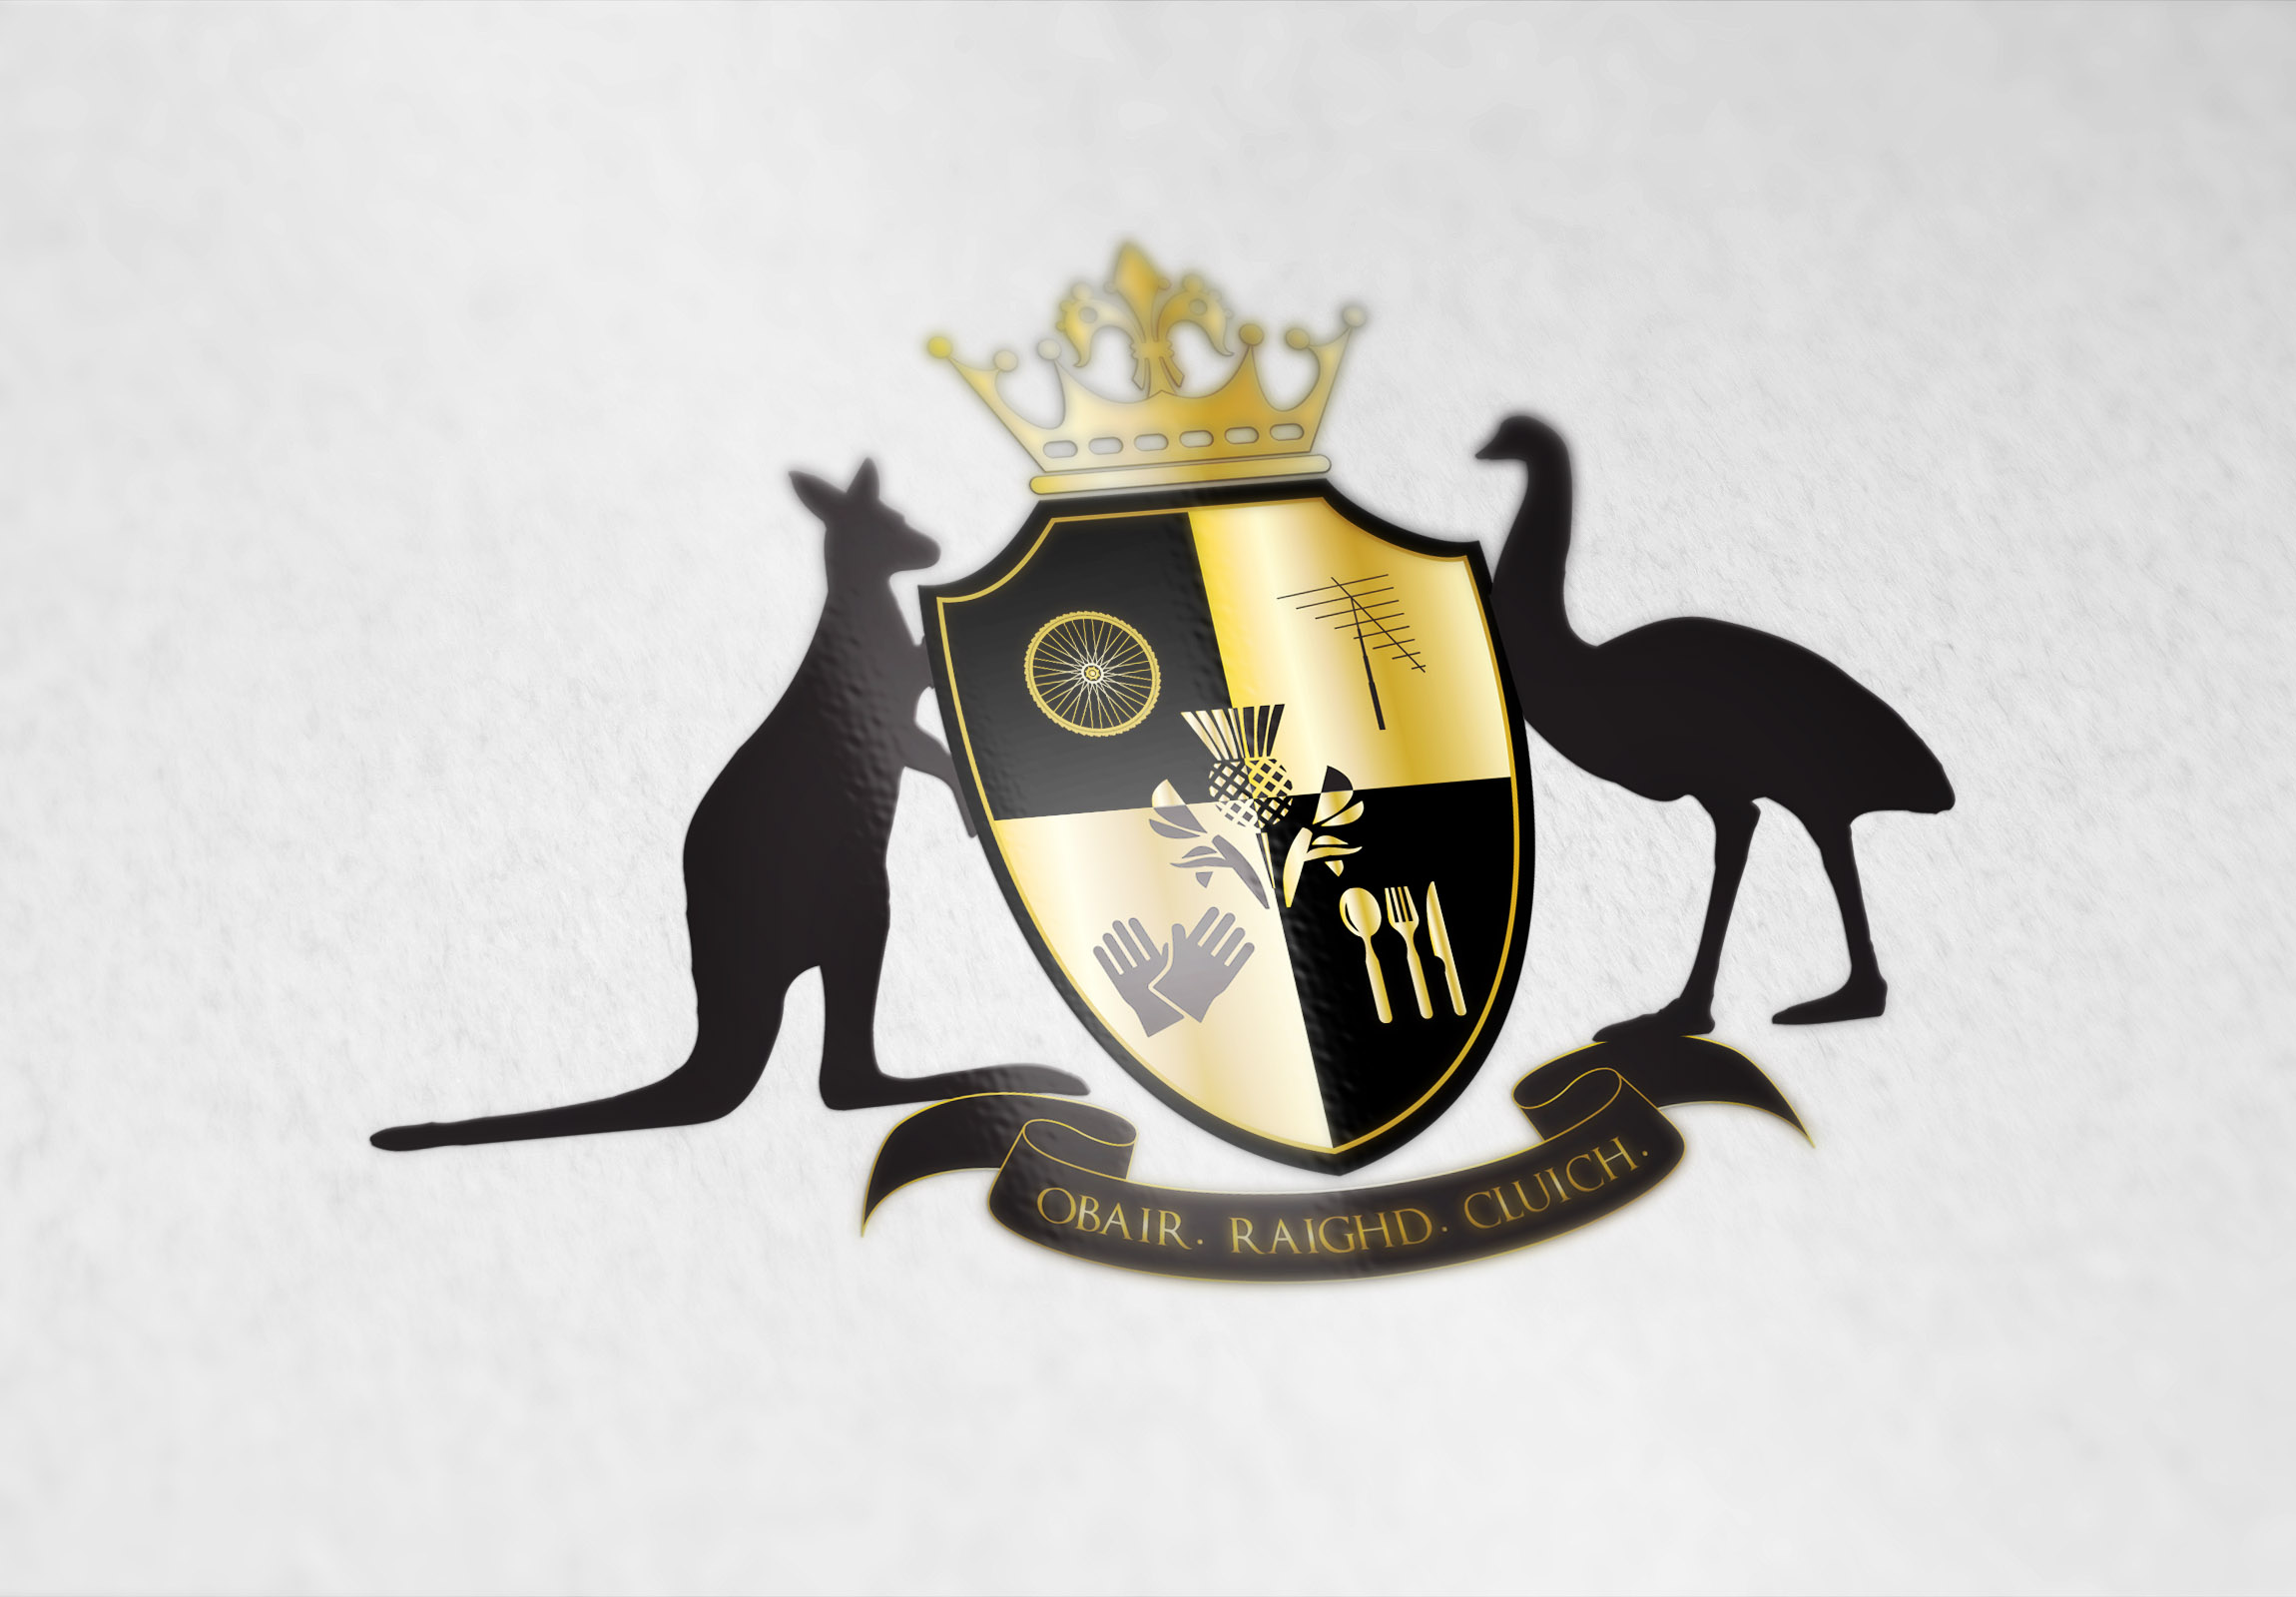 Coat of arms designed for a group of friends from Australia